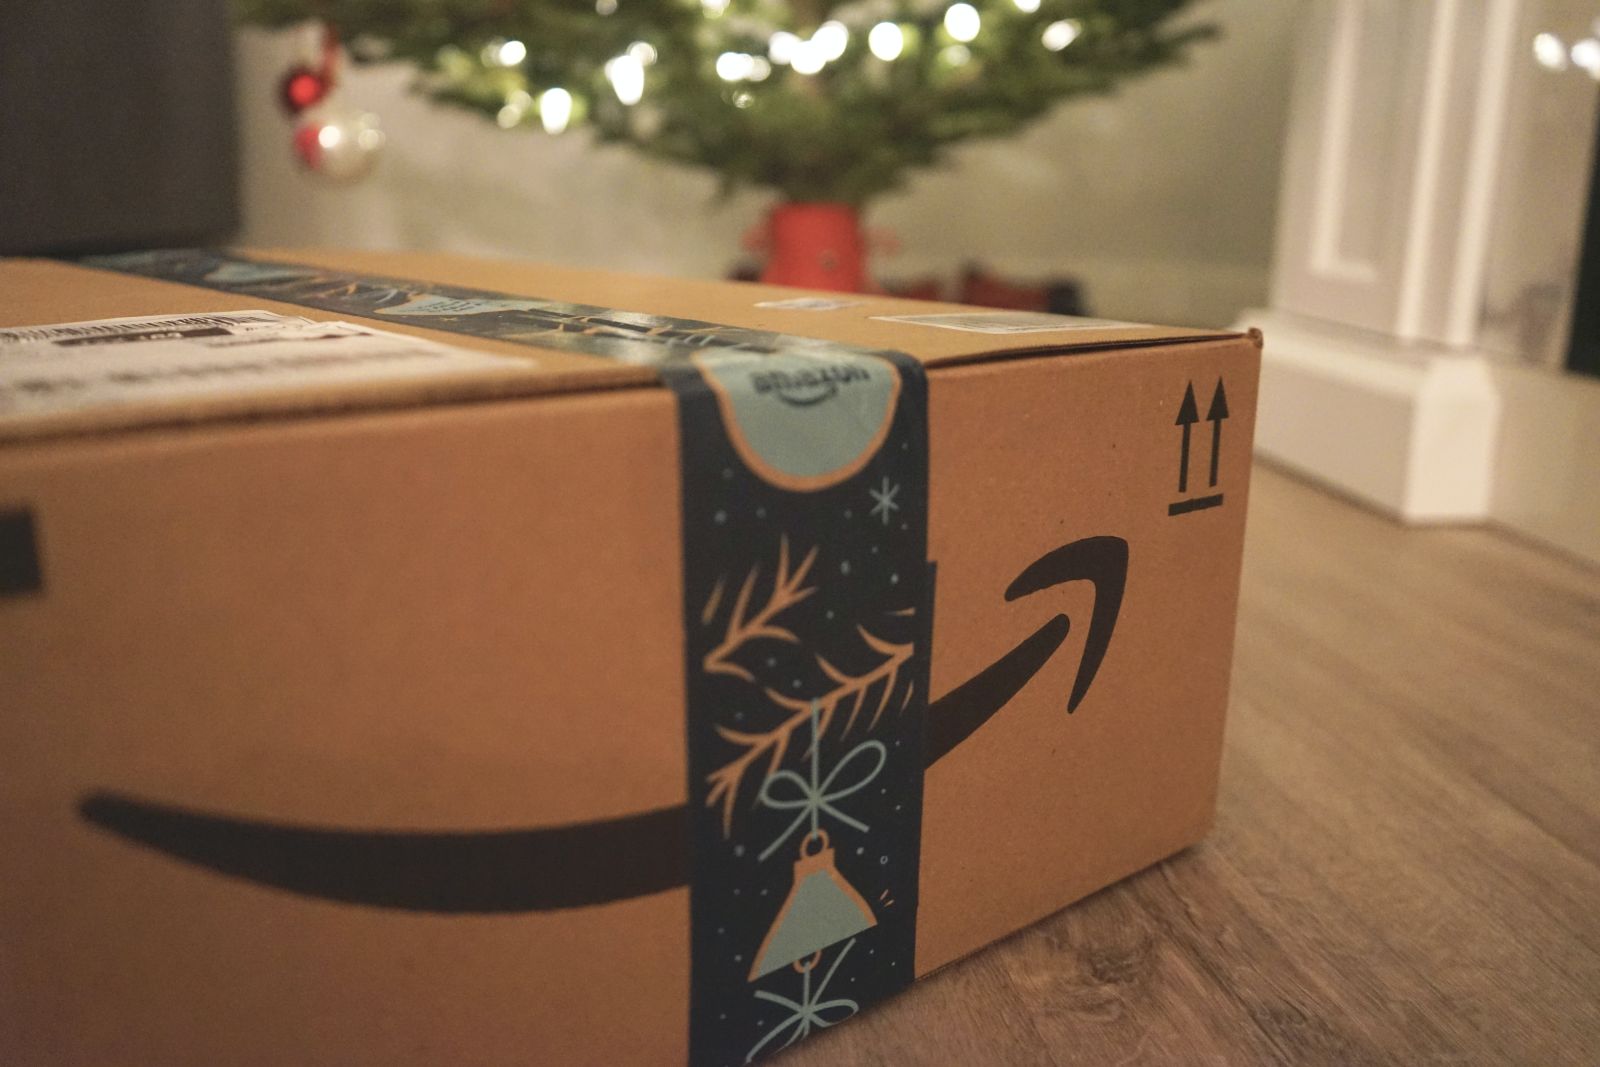 Tech (Ecommerce, Social Media, etc.) - Amazon Holiday delivery